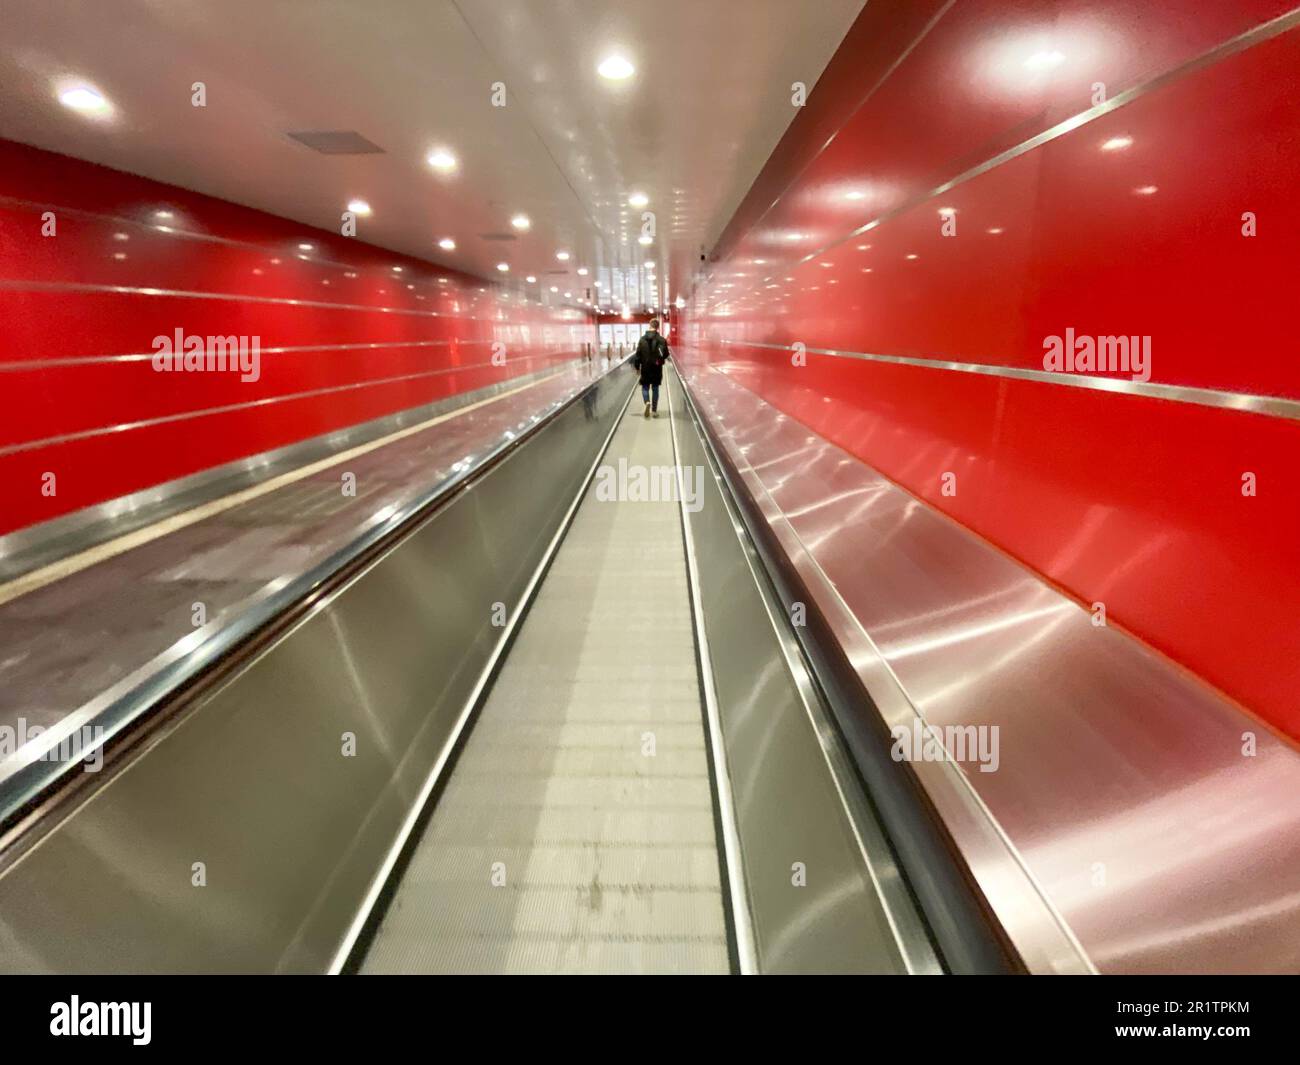 Large red modern long bright underground walkway between metro stations with travel walkers and escalators for quick passage of passengers. Stock Photo